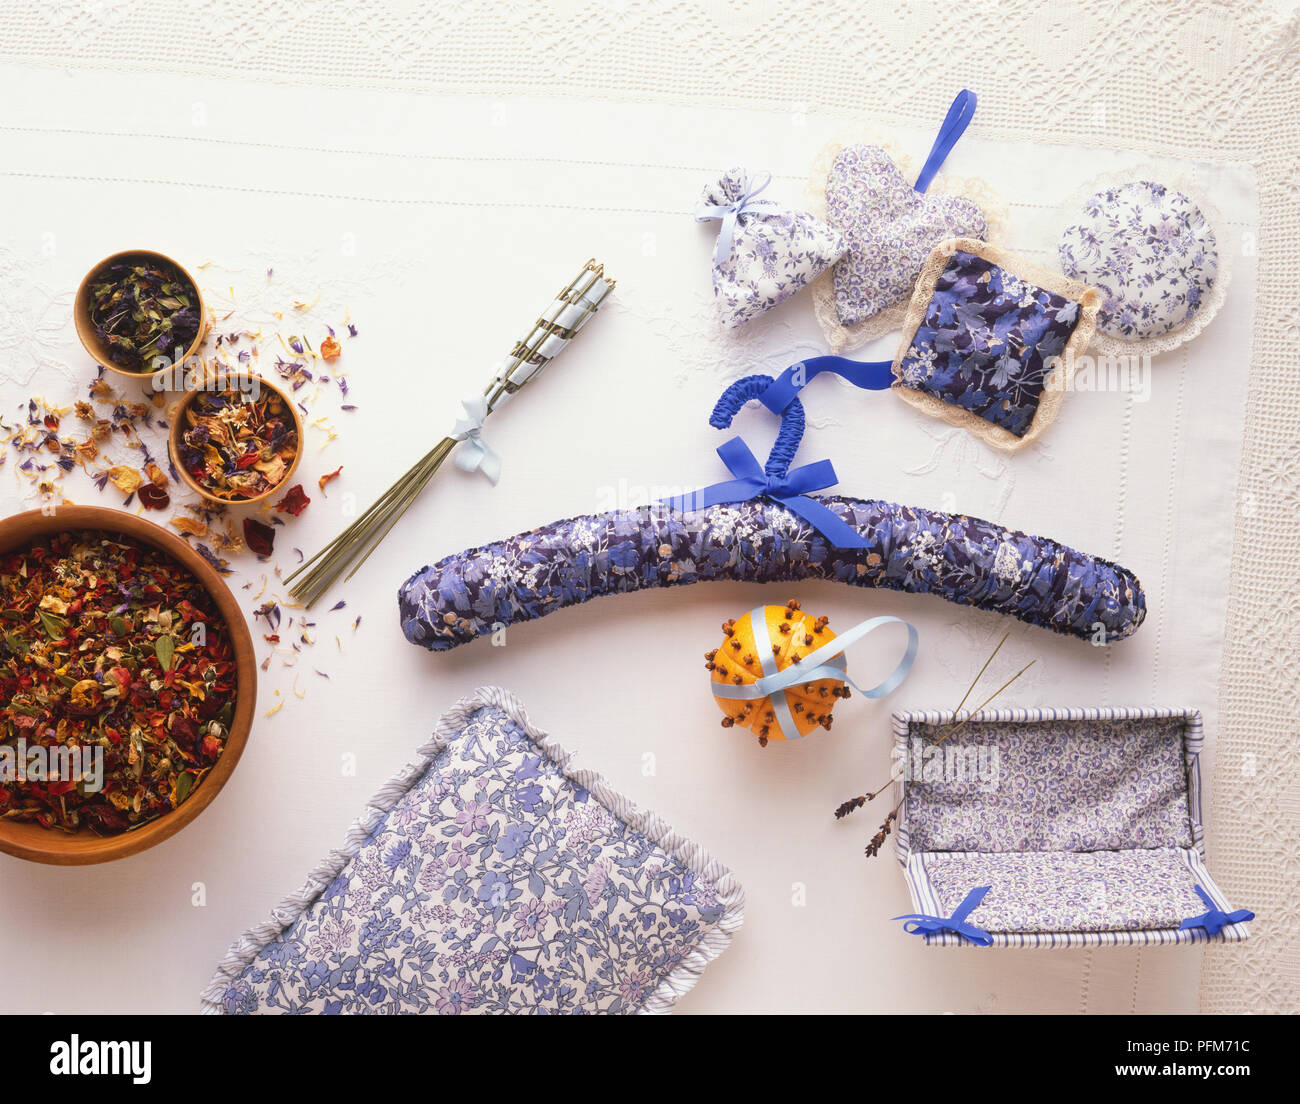 Selection of herbal fragrance ornaments, including potpourri, herb pillow, Lavender bundle, pomander, perfumed box, scented hanger and lavender bags, close up Stock Photo